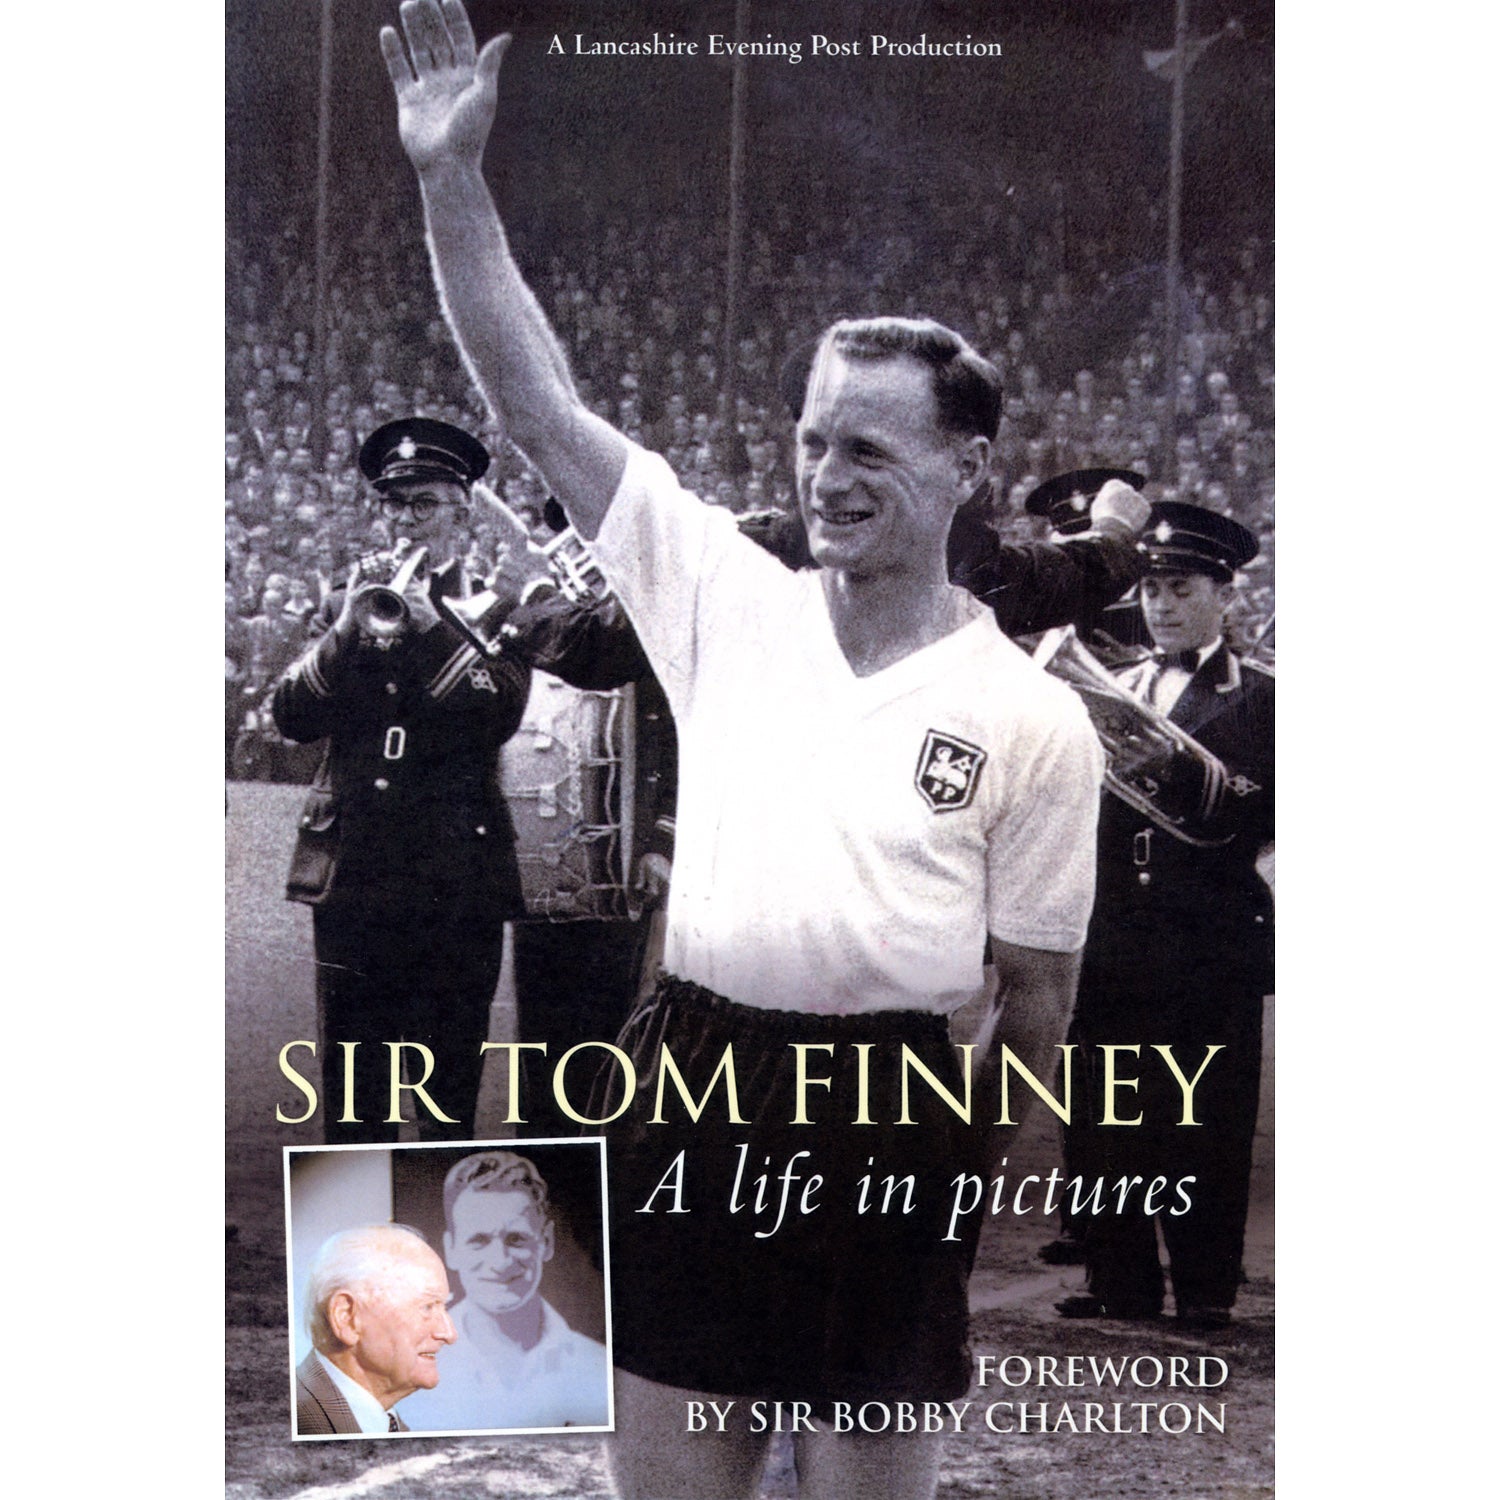 Sir Tom Finney – A life in pictures